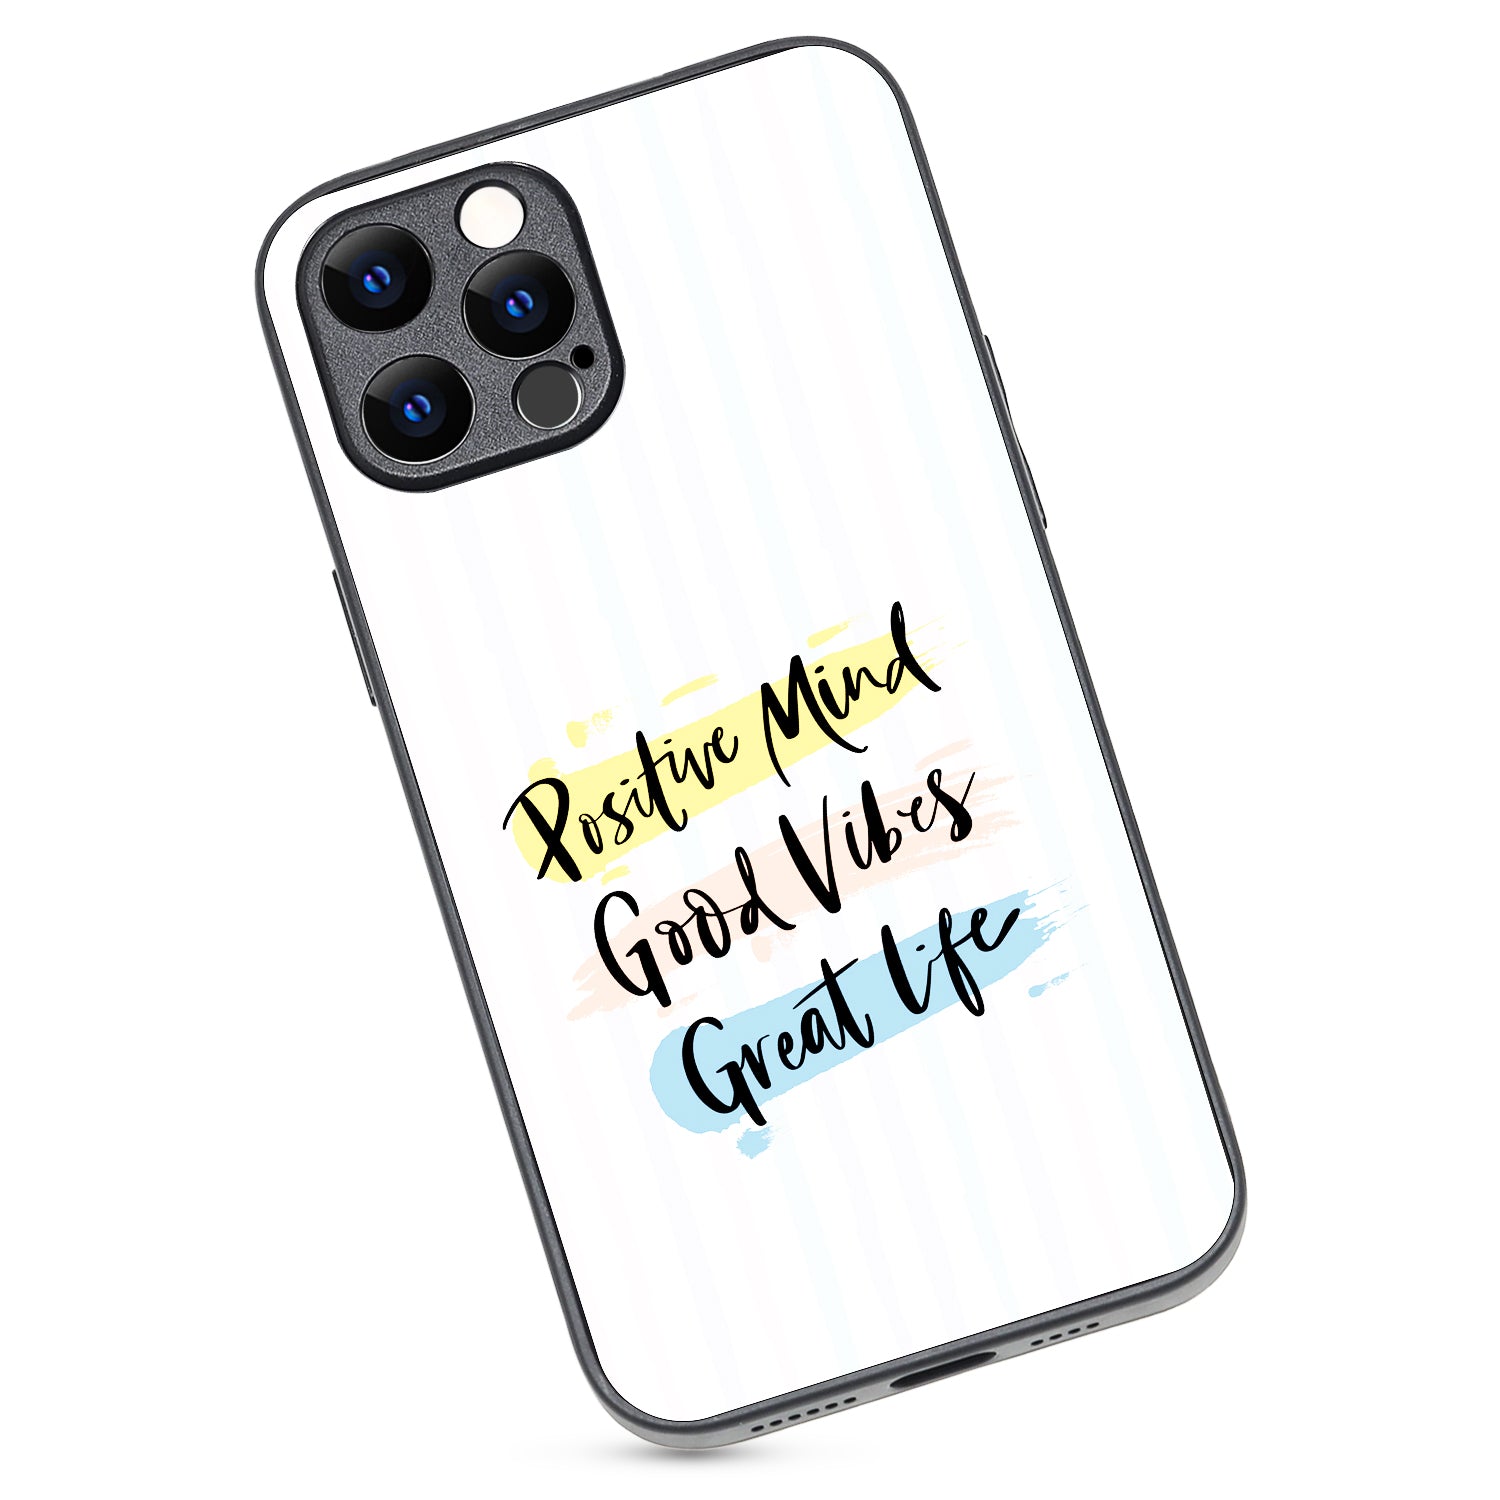 Great Life Motivational Quotes iPhone 12 Pro Max Case